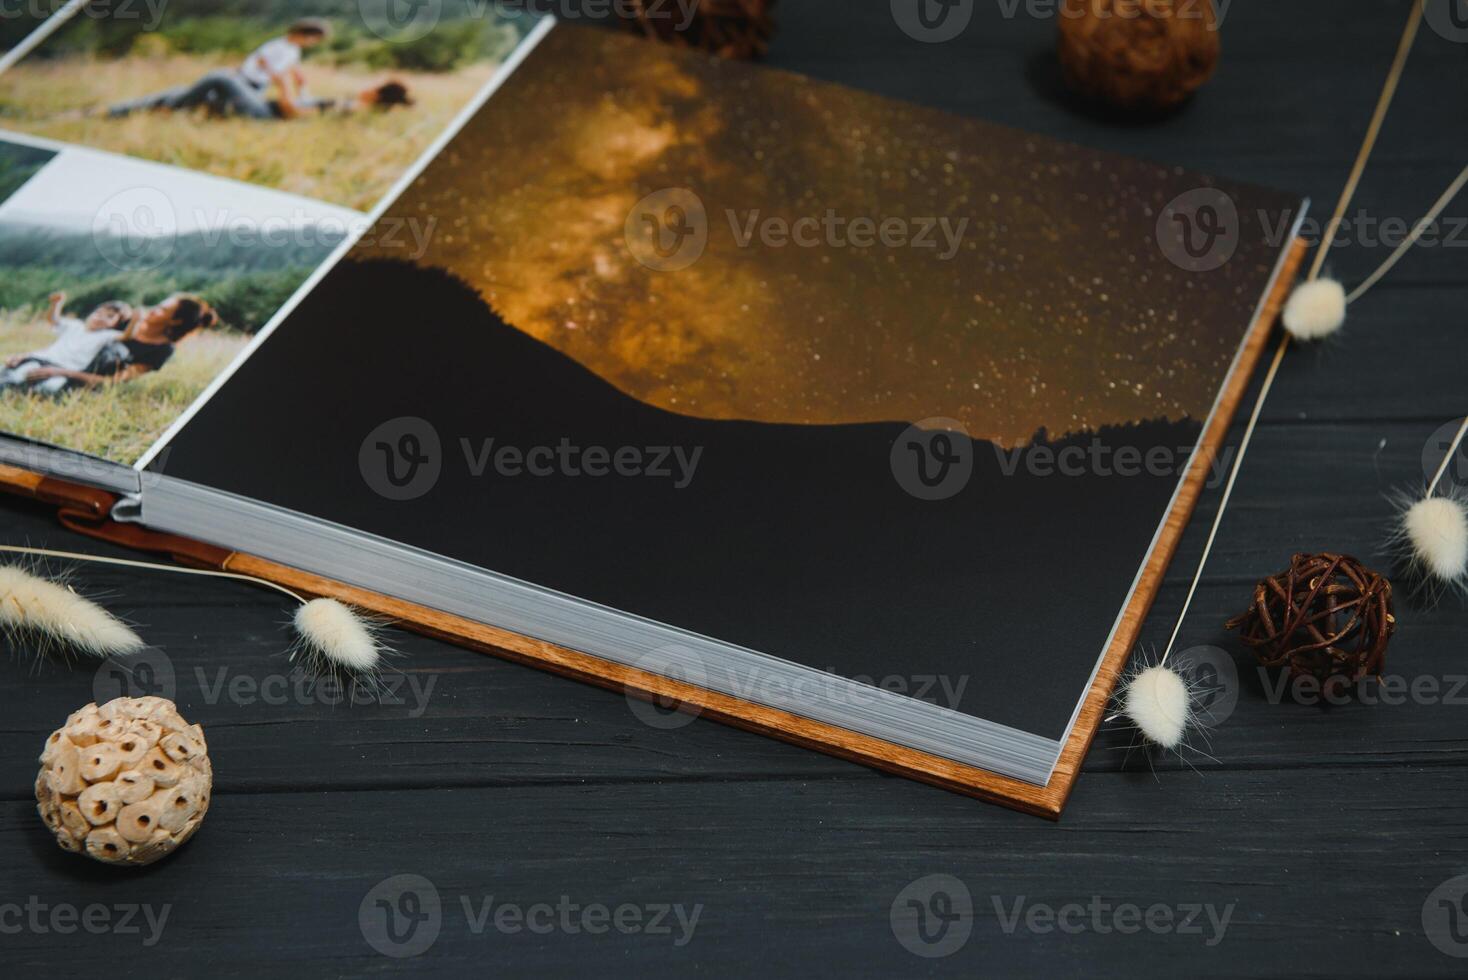 premium photo book, large size, natural wood cover, quality binding. Family photobook, recreation memories